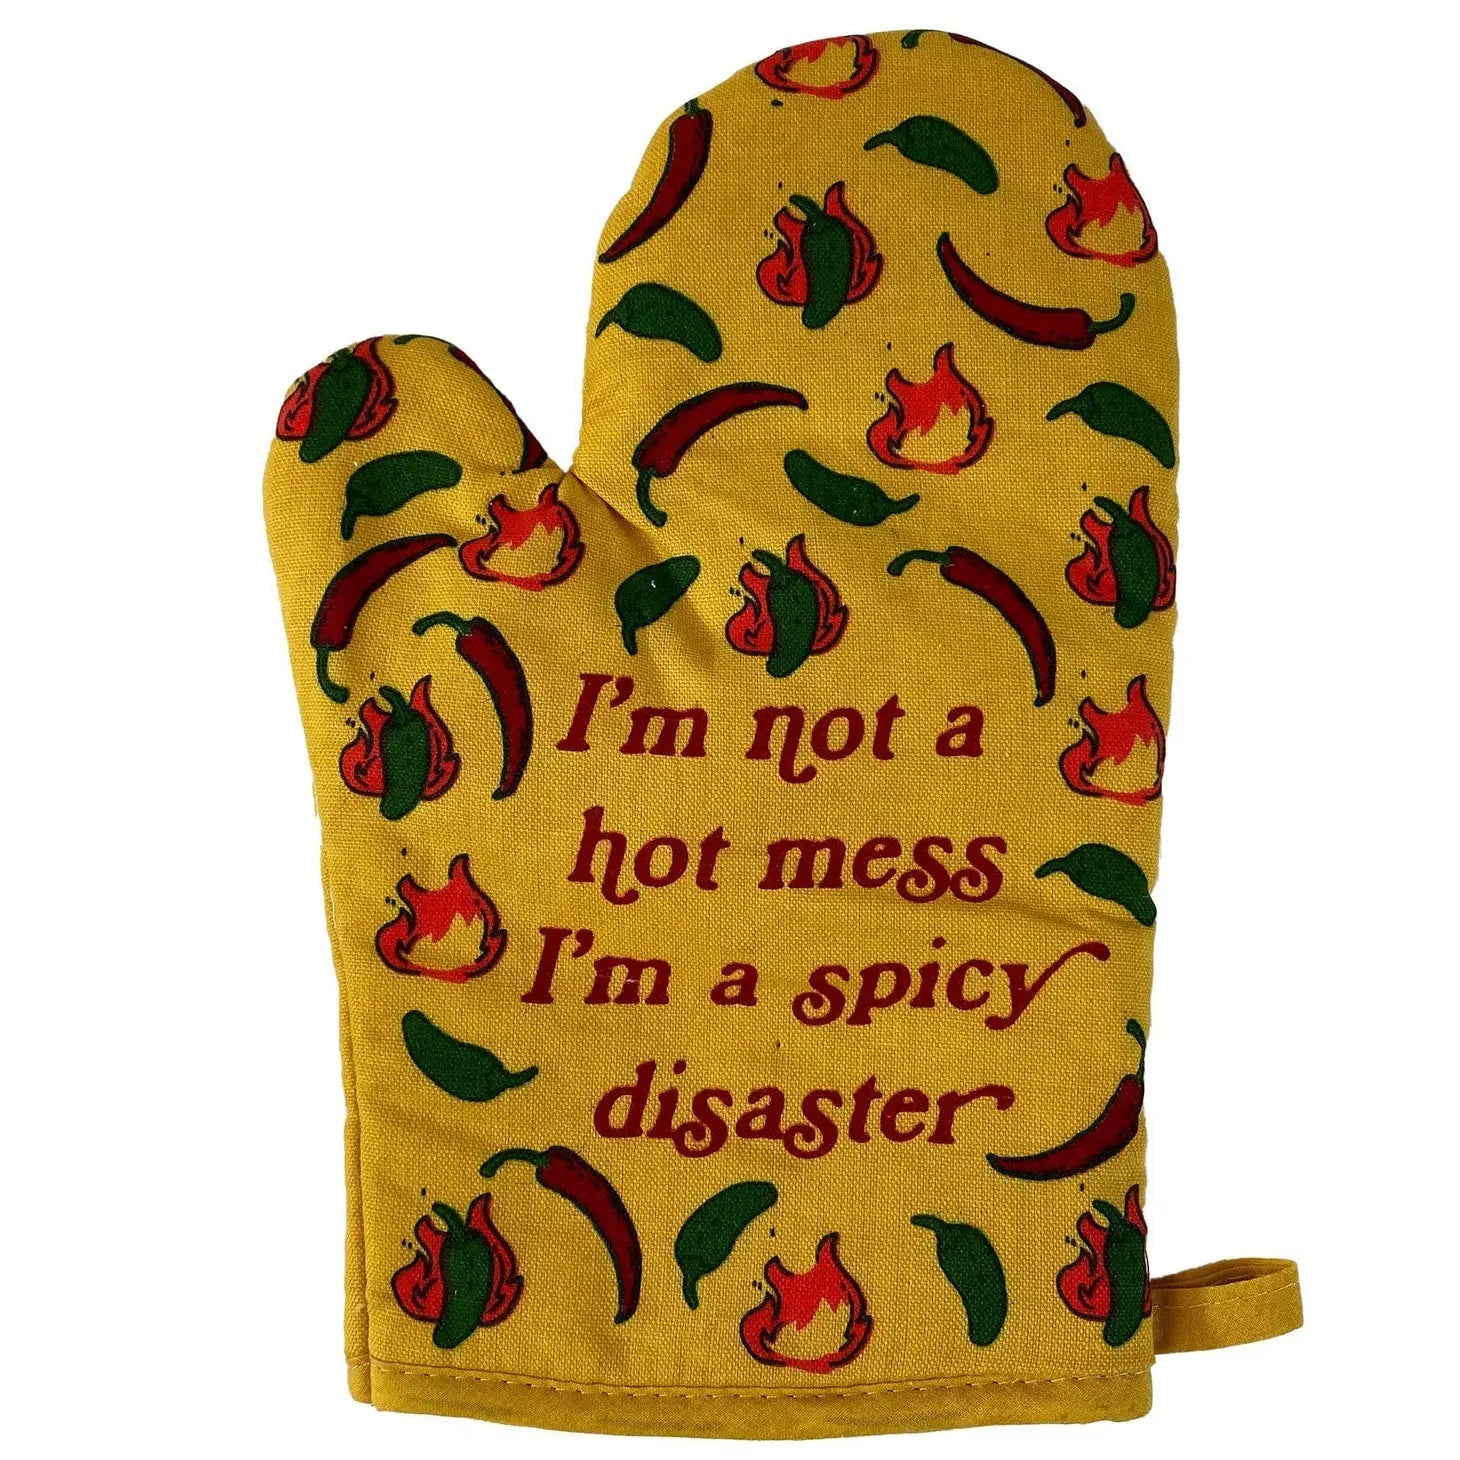 I'm Not a Hot Mess I'm a Spicy Disaster Oven Mitt in Chili Peppers Motif